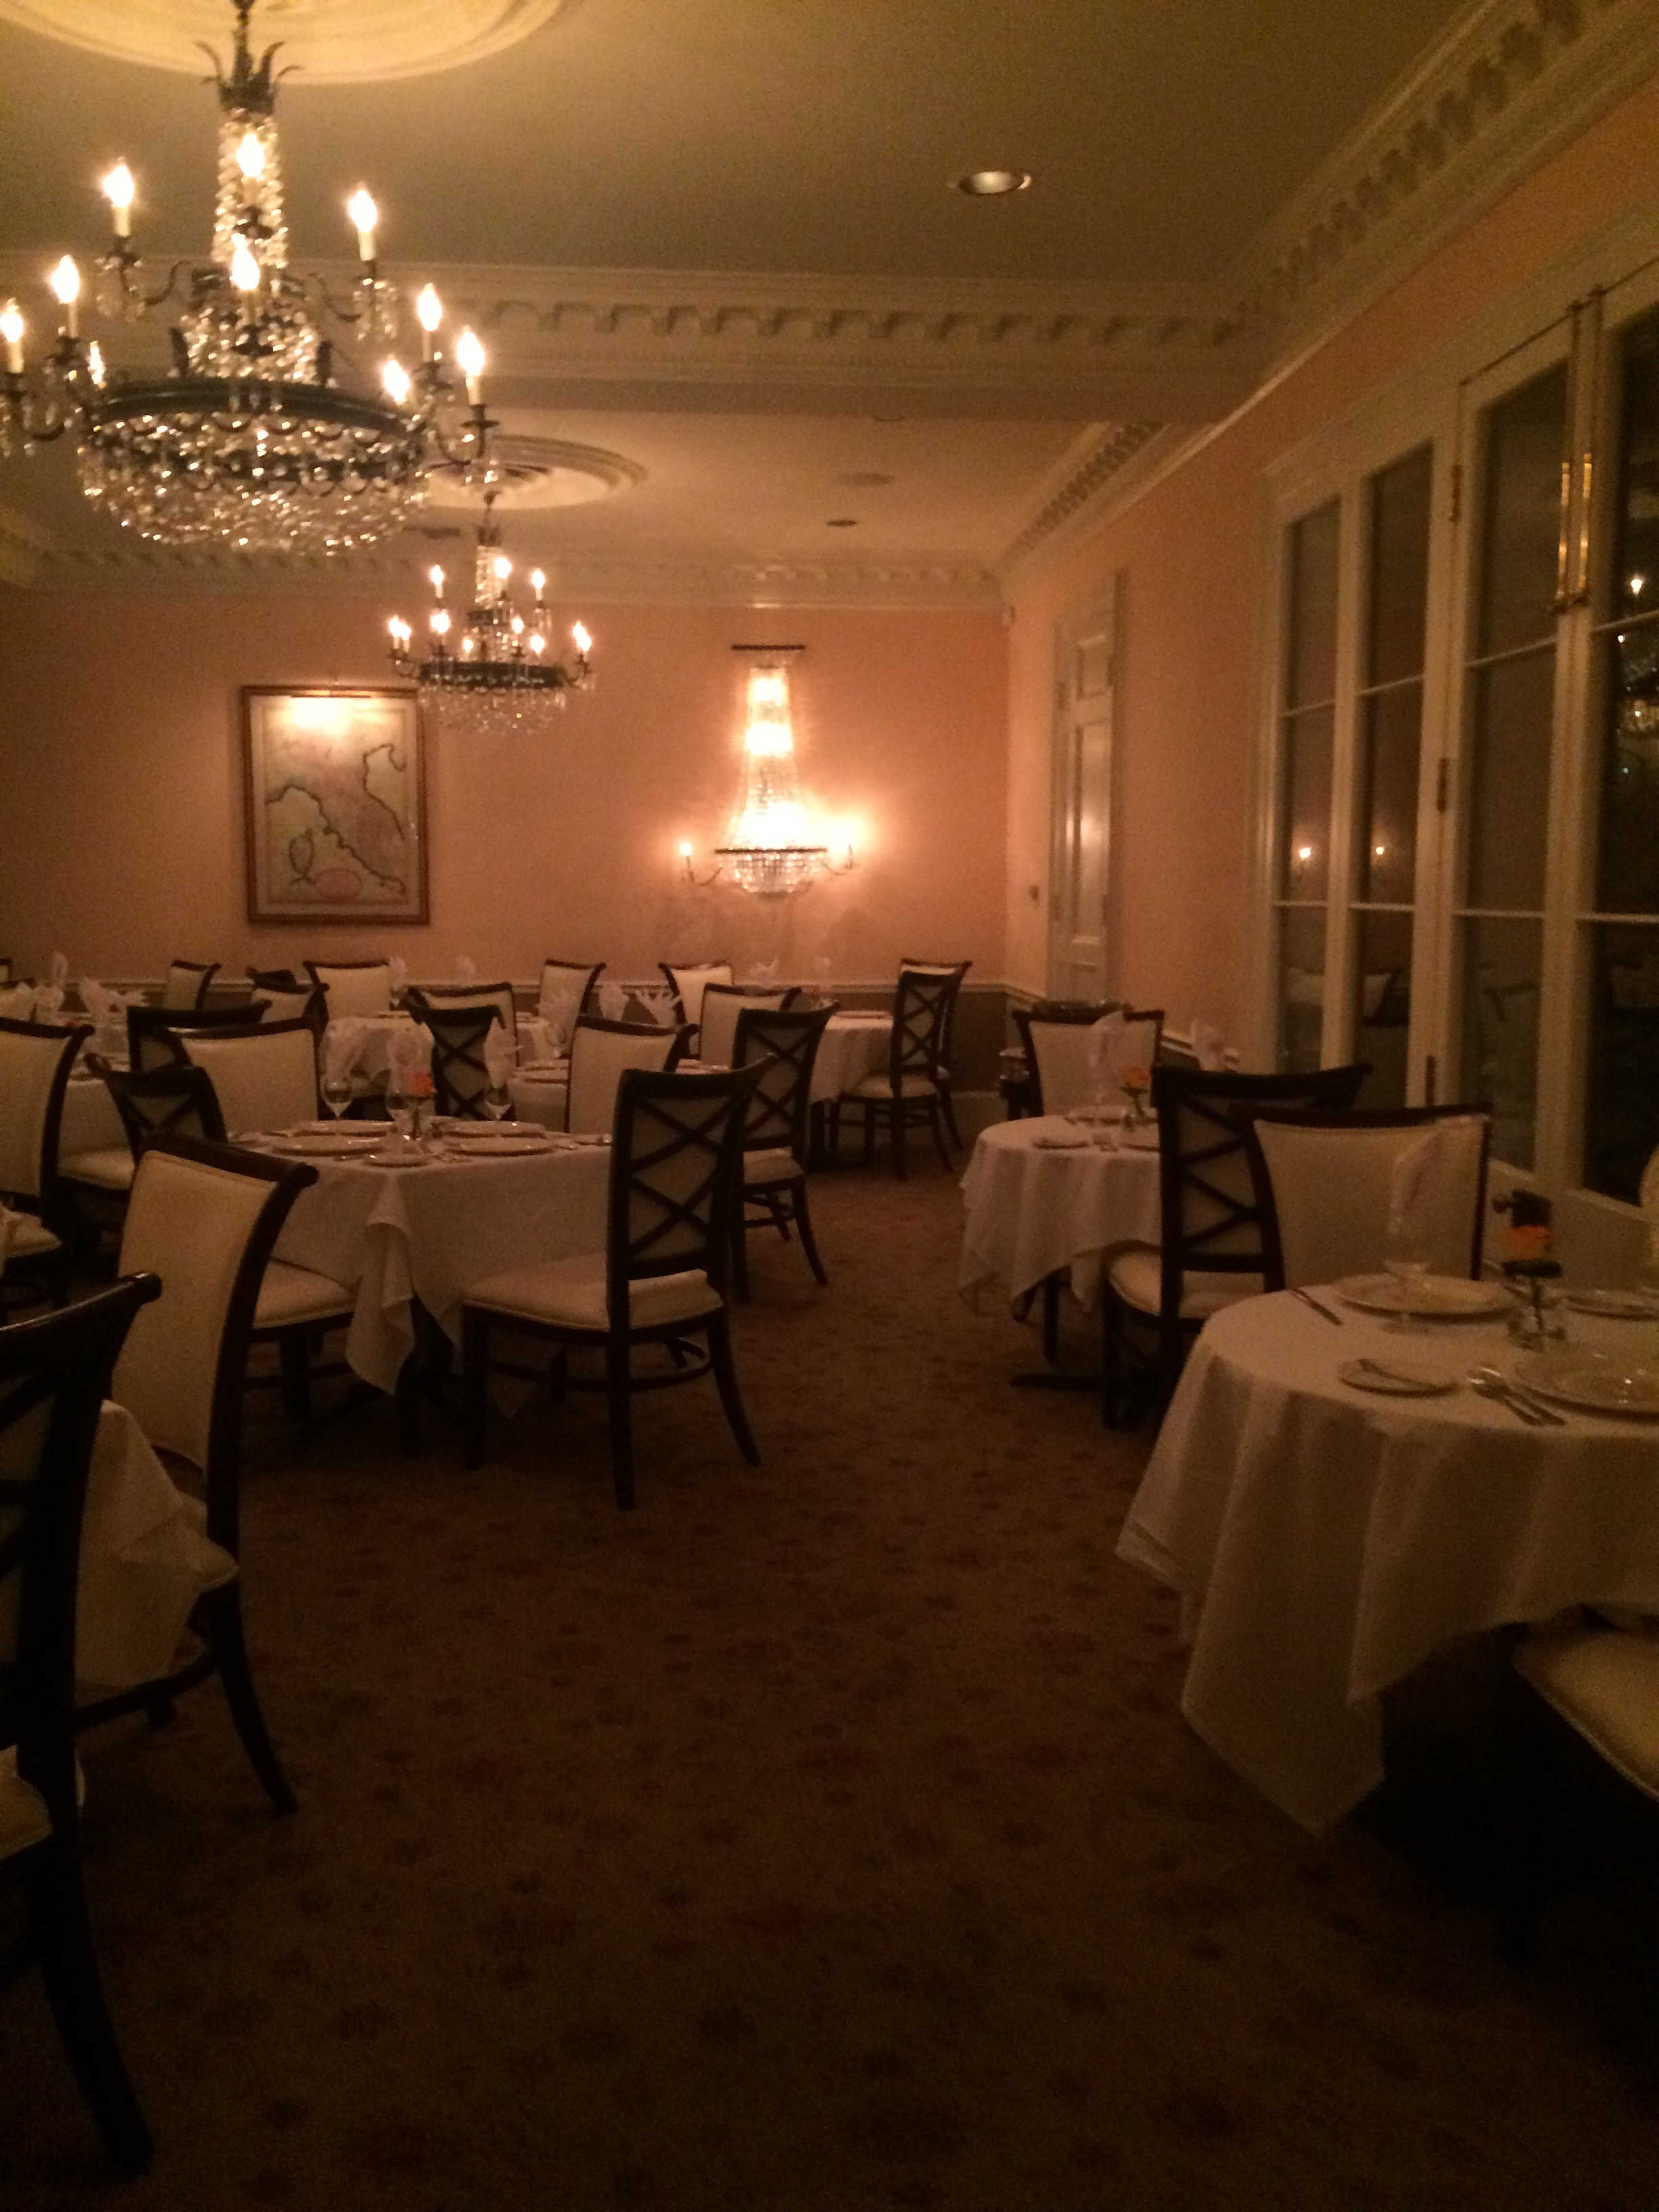 Broussard's Fine Dining - New Orleans